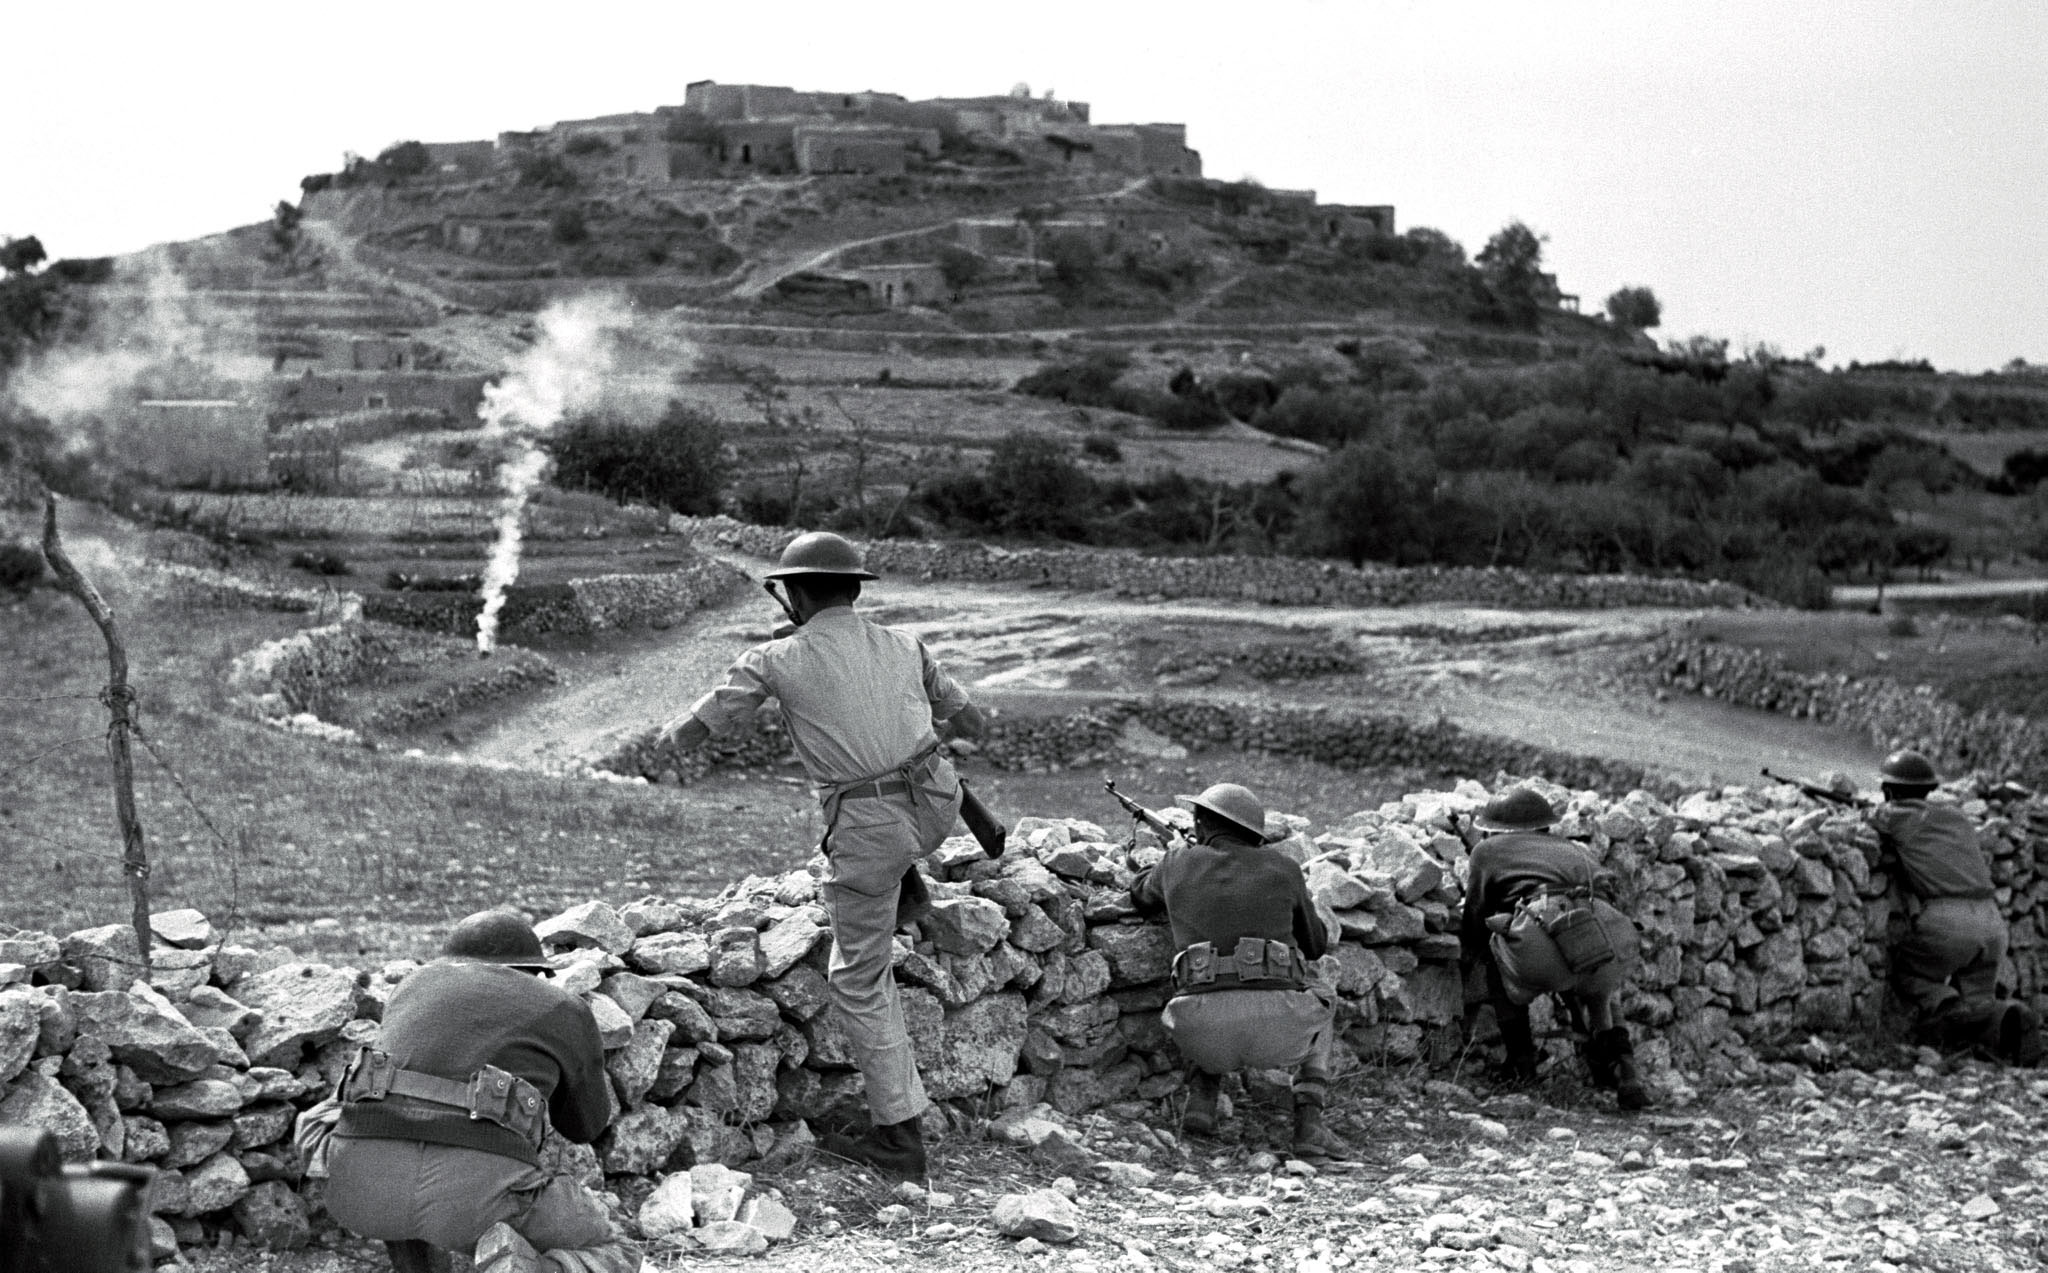 Israeli troops in action near an unidentified Arab village in the Galilee region during the opening stages of the 1948 War of Independence.  REUTERS